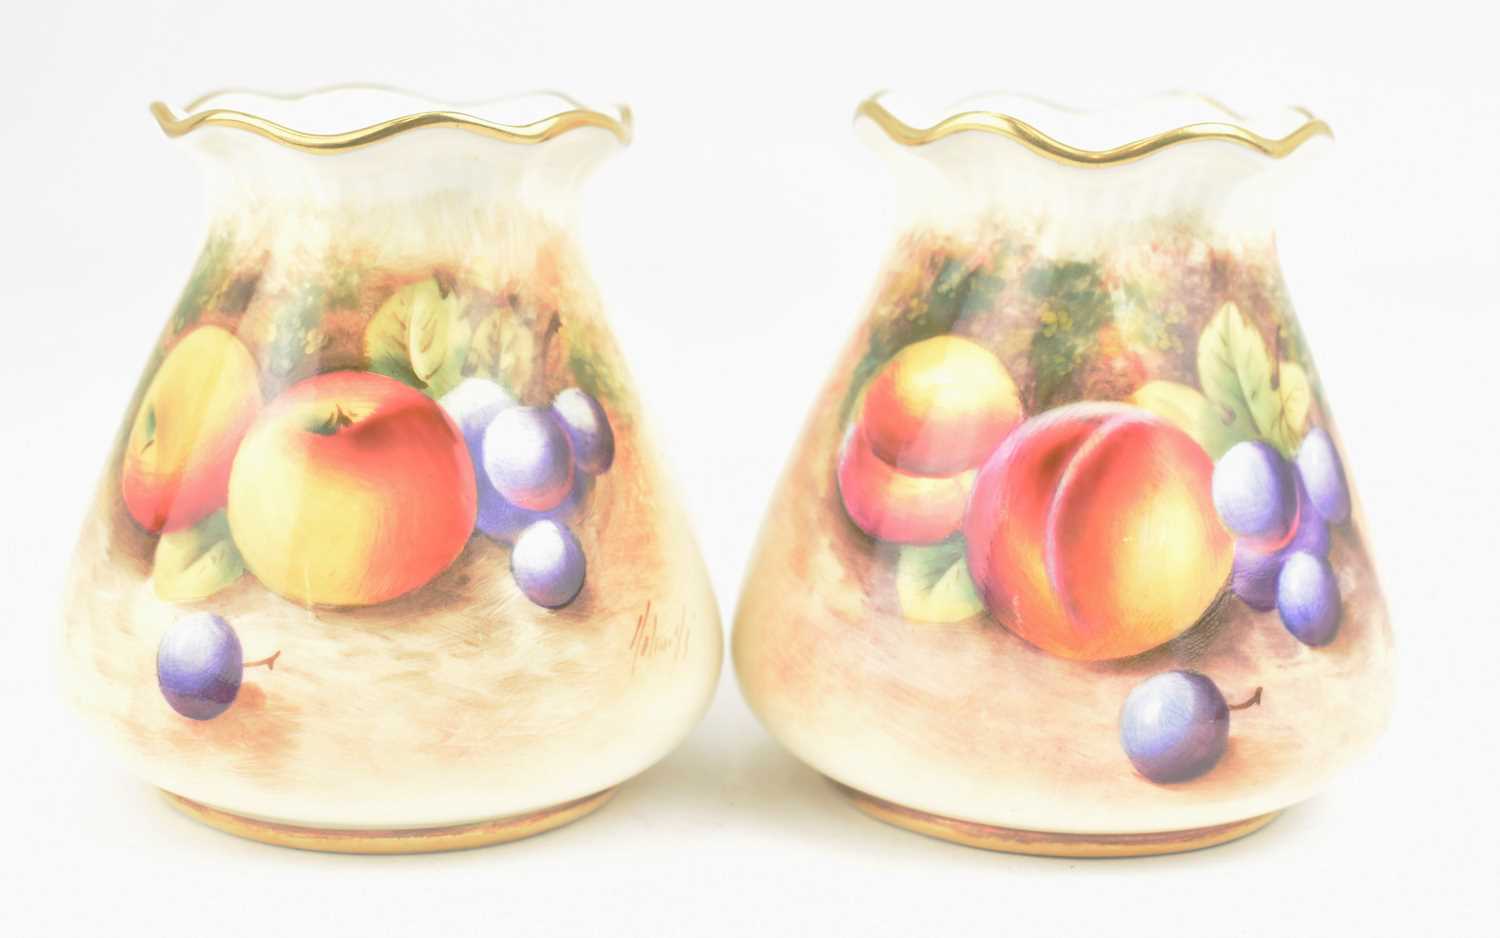 ROYAL WORCESTER; two small porcelain vases, both hand painted with a similar 'Fallen Fruit' design